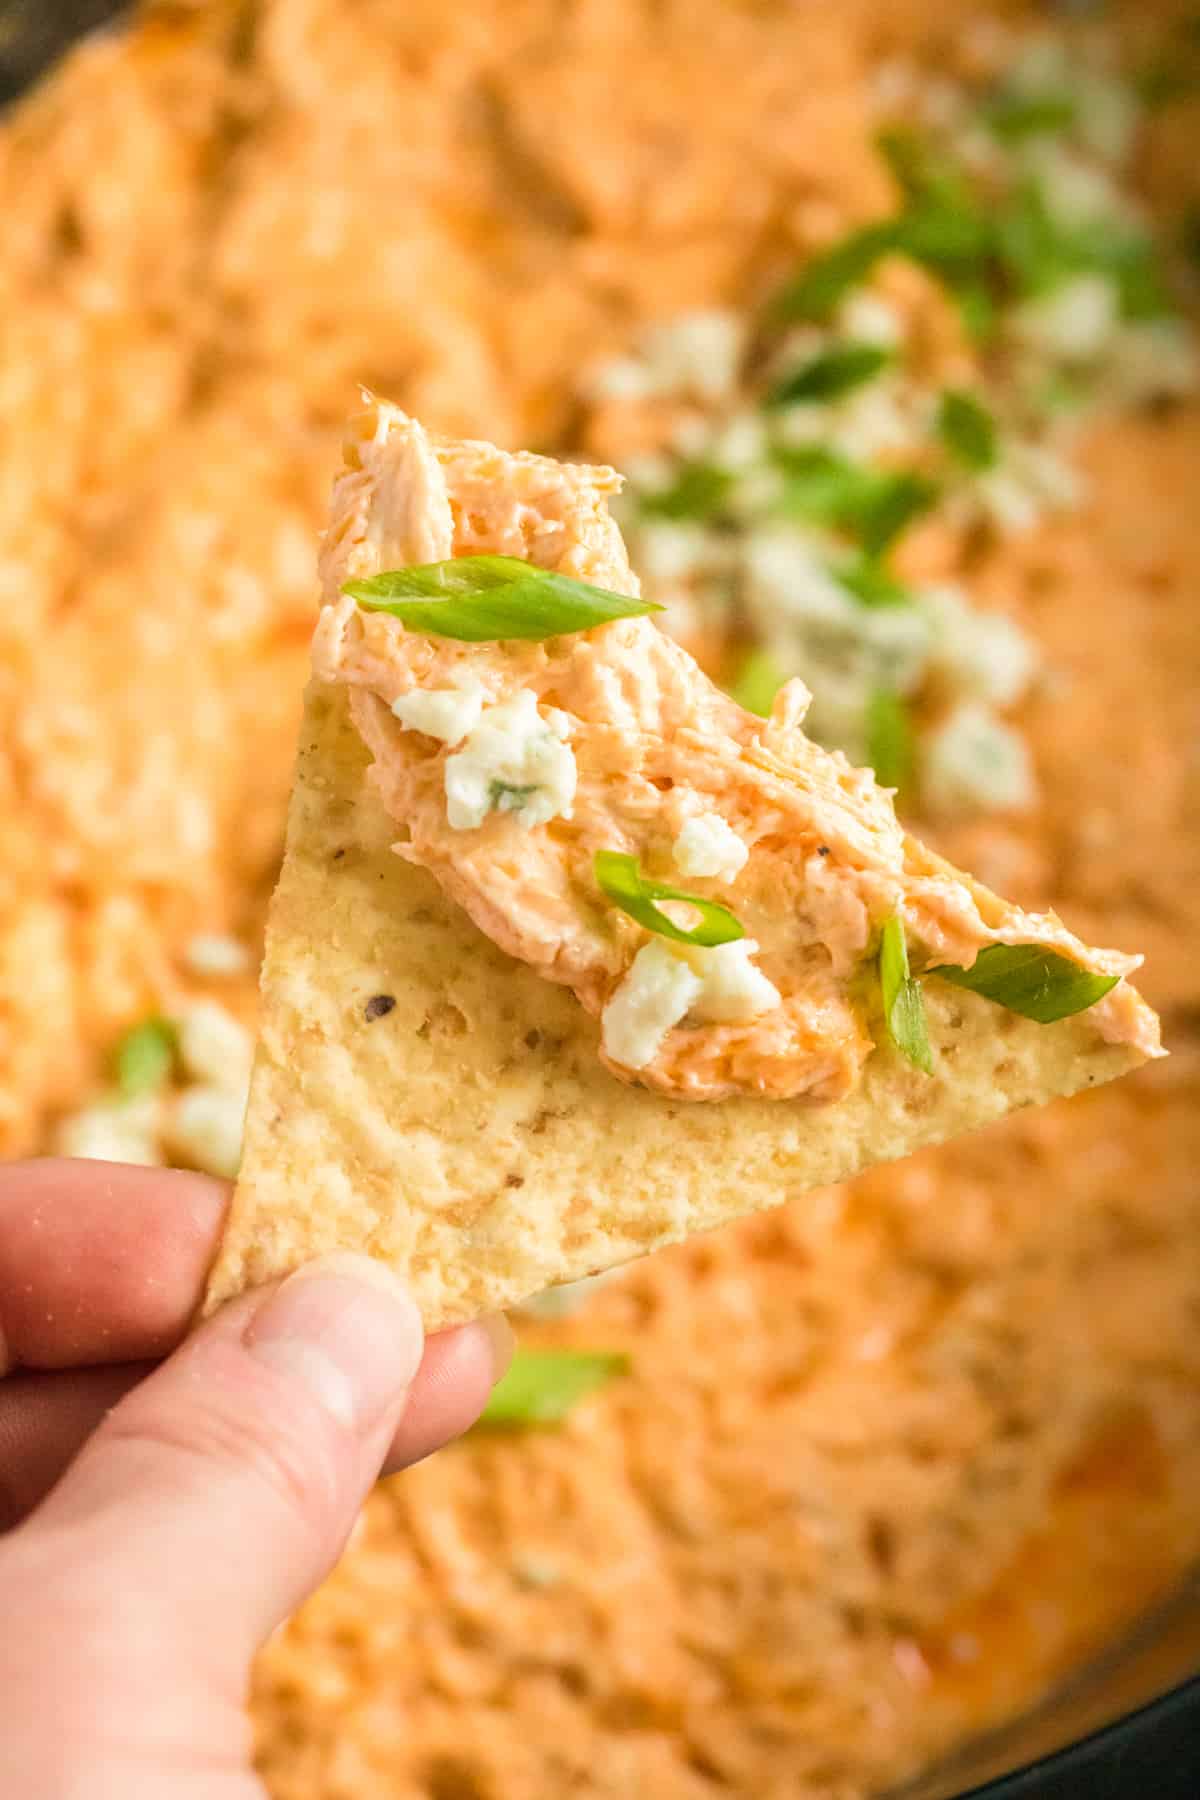 Tortilla chip dipped in buffalo chicken dip with cream cheese.